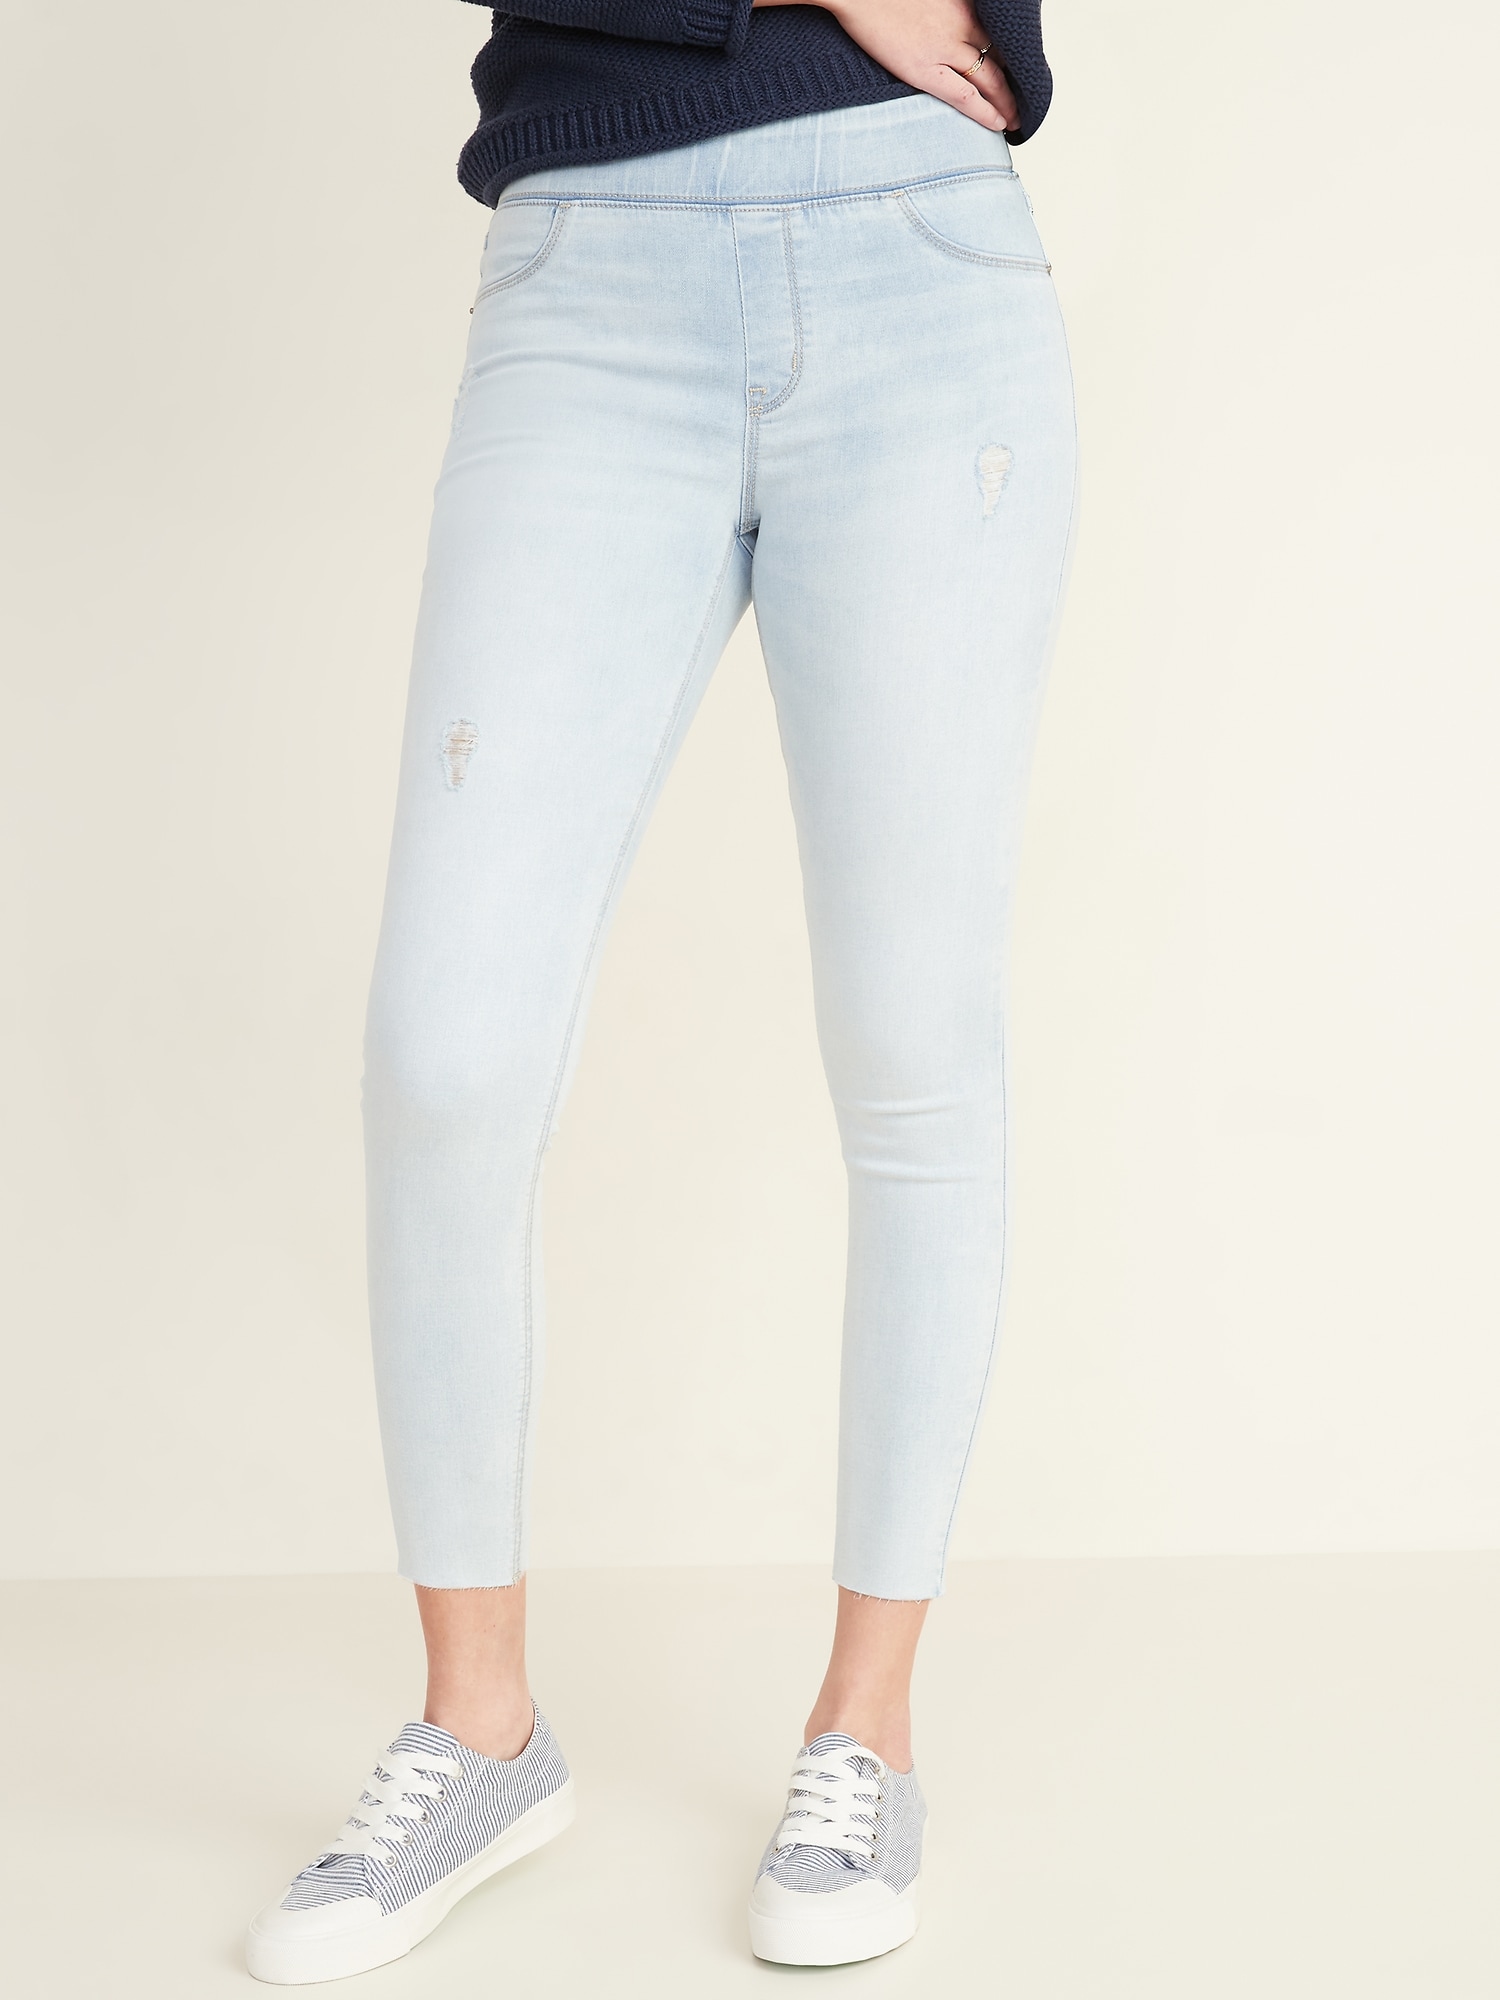 old navy distressed jeggings